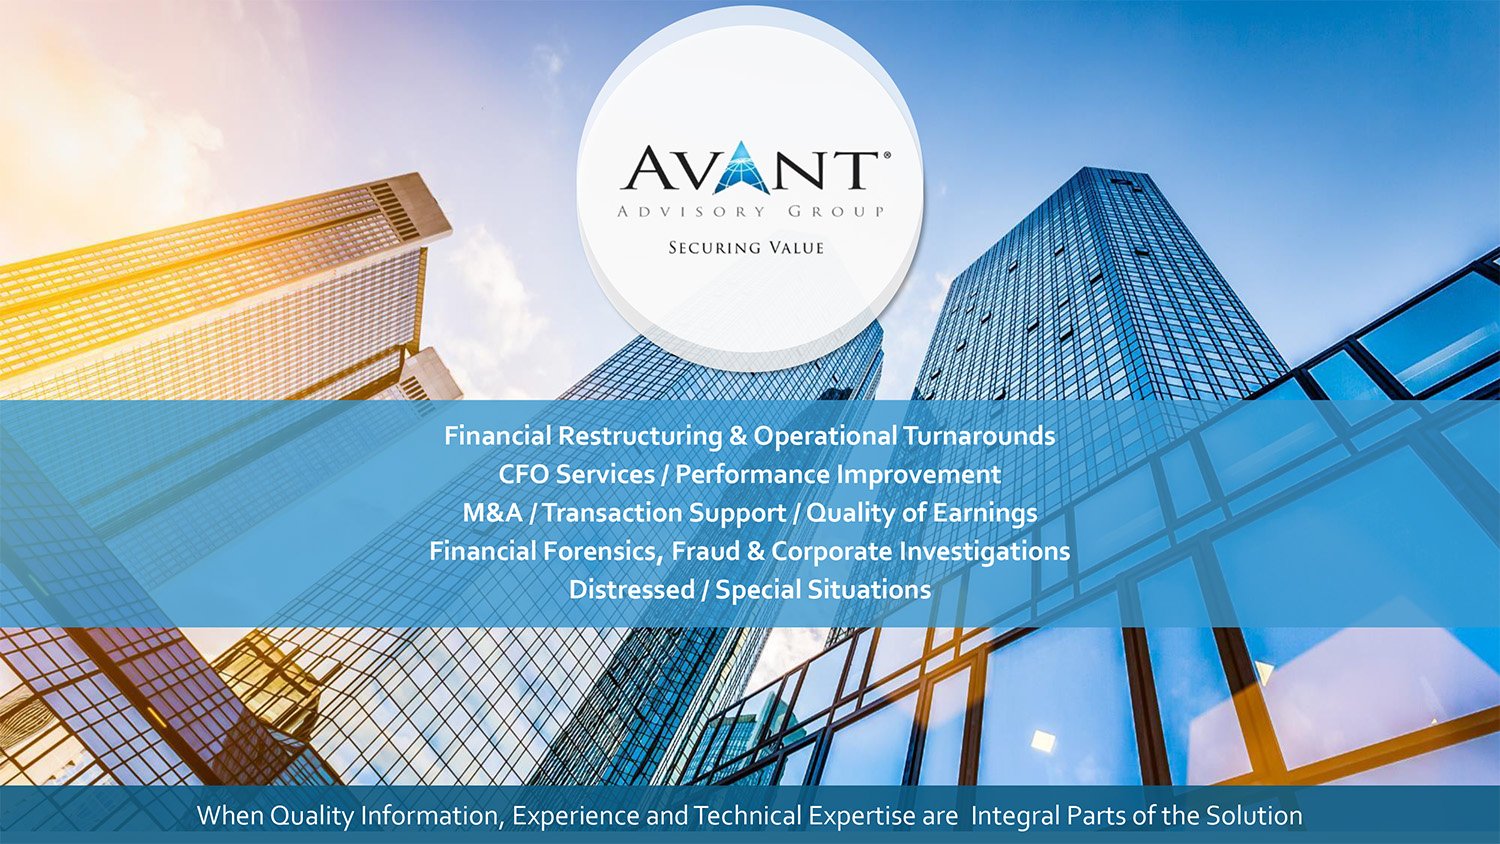 Avant Advisory Group Distressed Turnarounds  Restructuring 5 15 2021JD 1